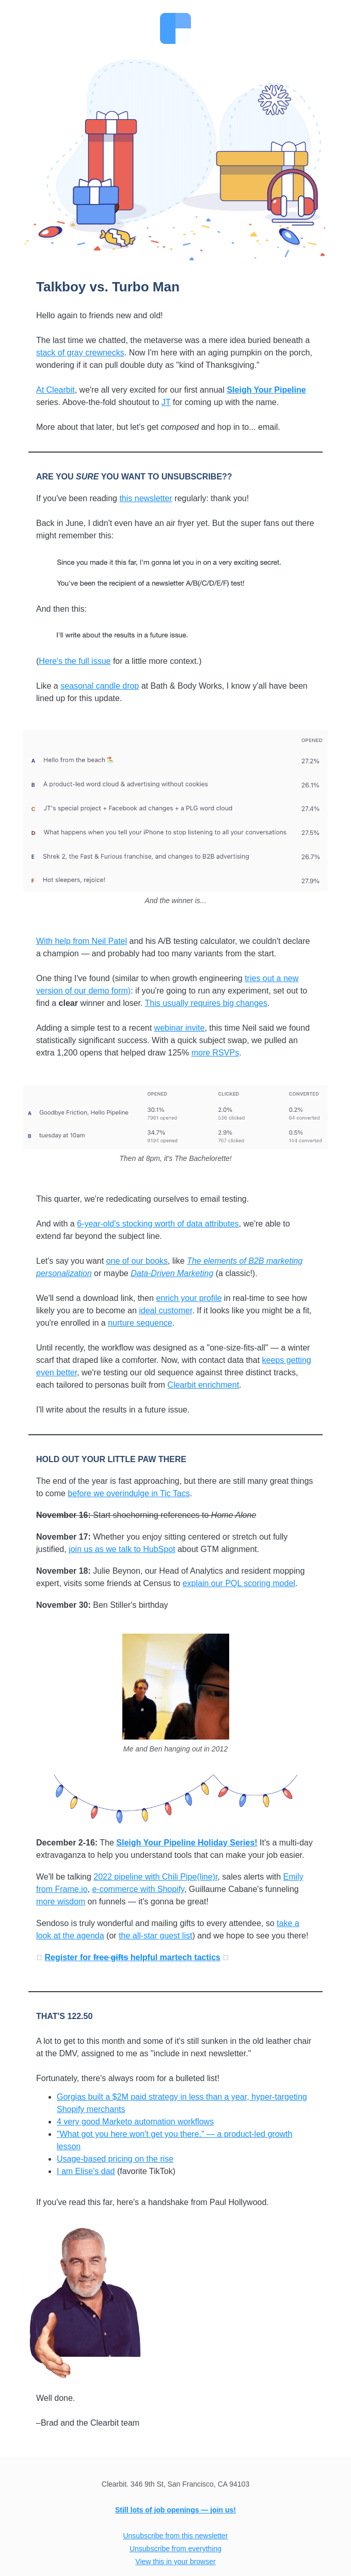 SUBJECT LINE TEST from Clearbit - Desktop Email View | Really Good Emails